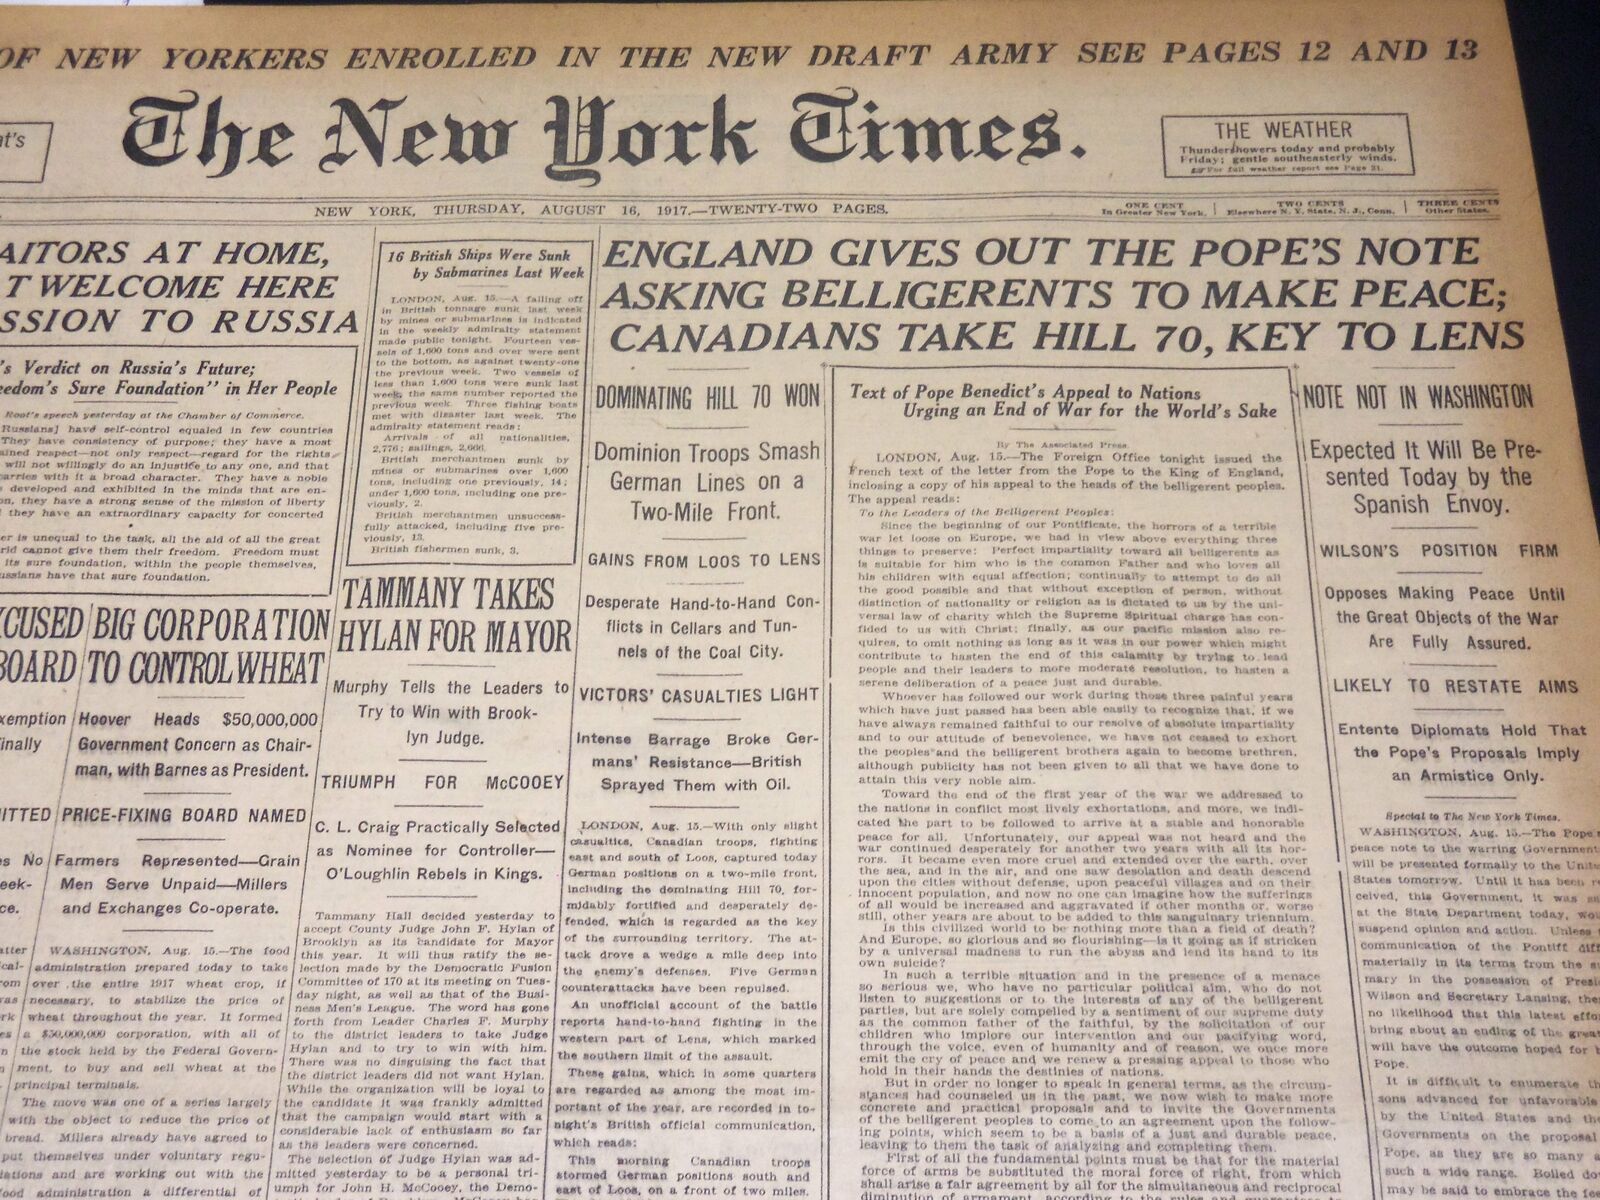 1917 AUGUST 16 NEW YORK TIMES - ENGLAND GIVES OUT POPE'S NOTE - NT 8513